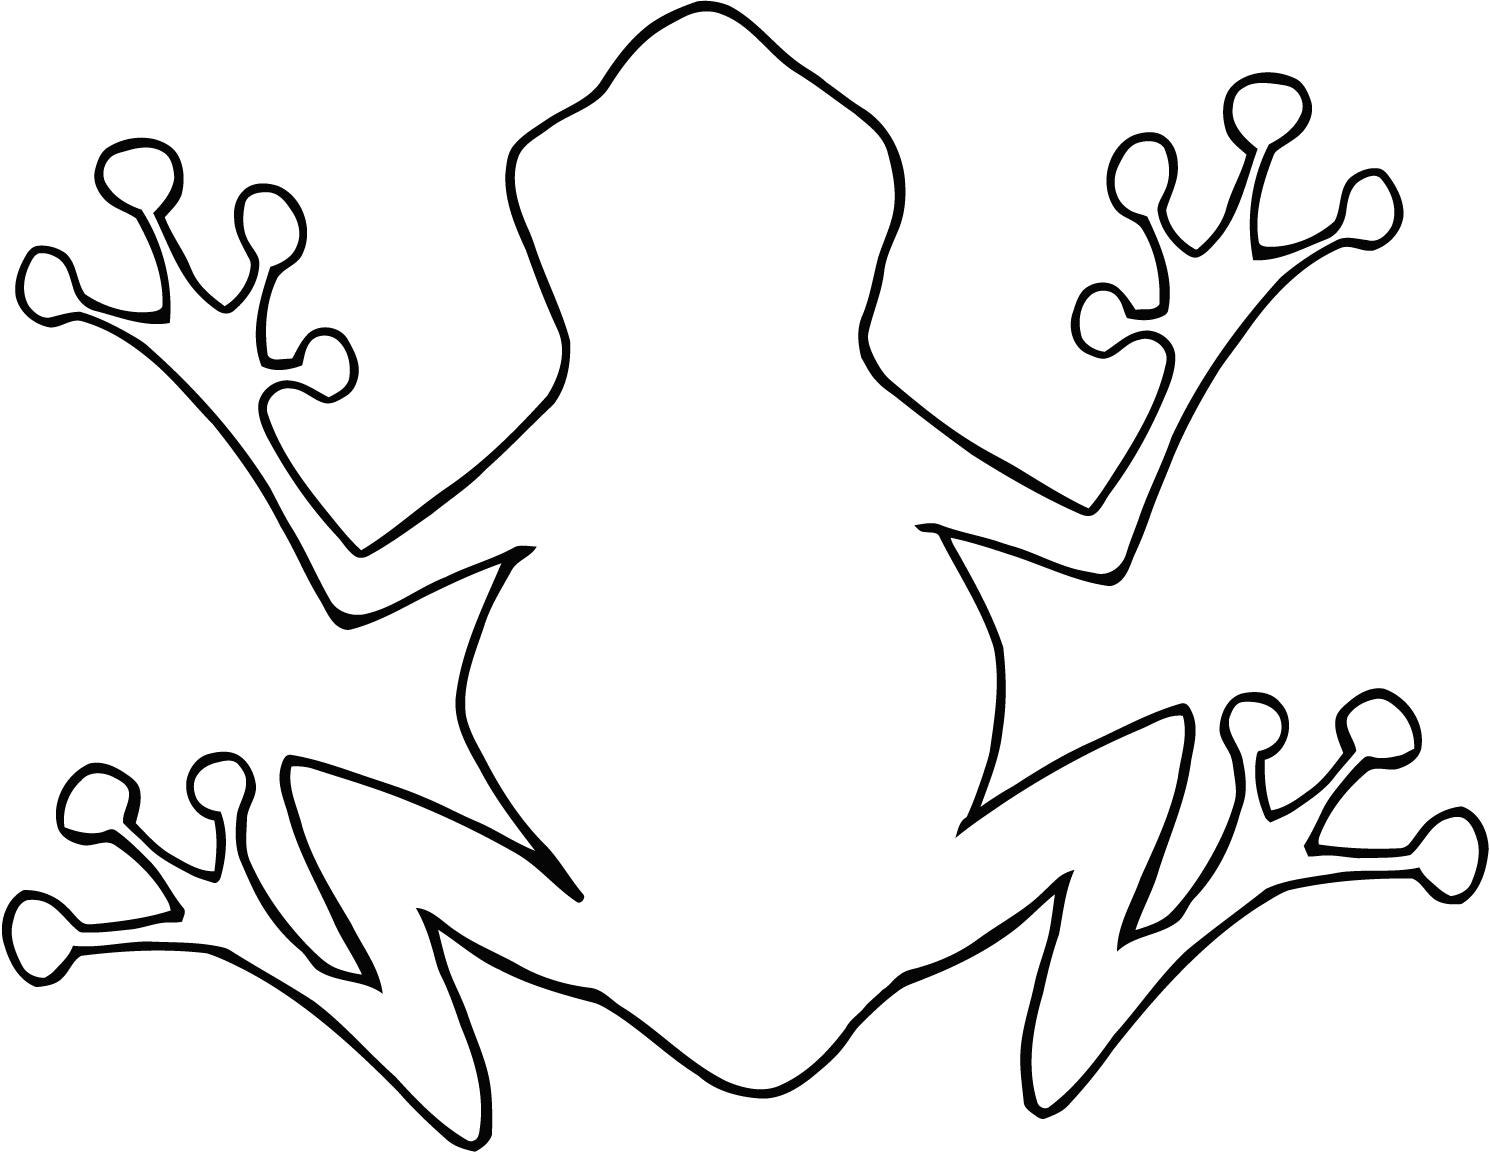 Frog Pics For Kids - ClipArt Best